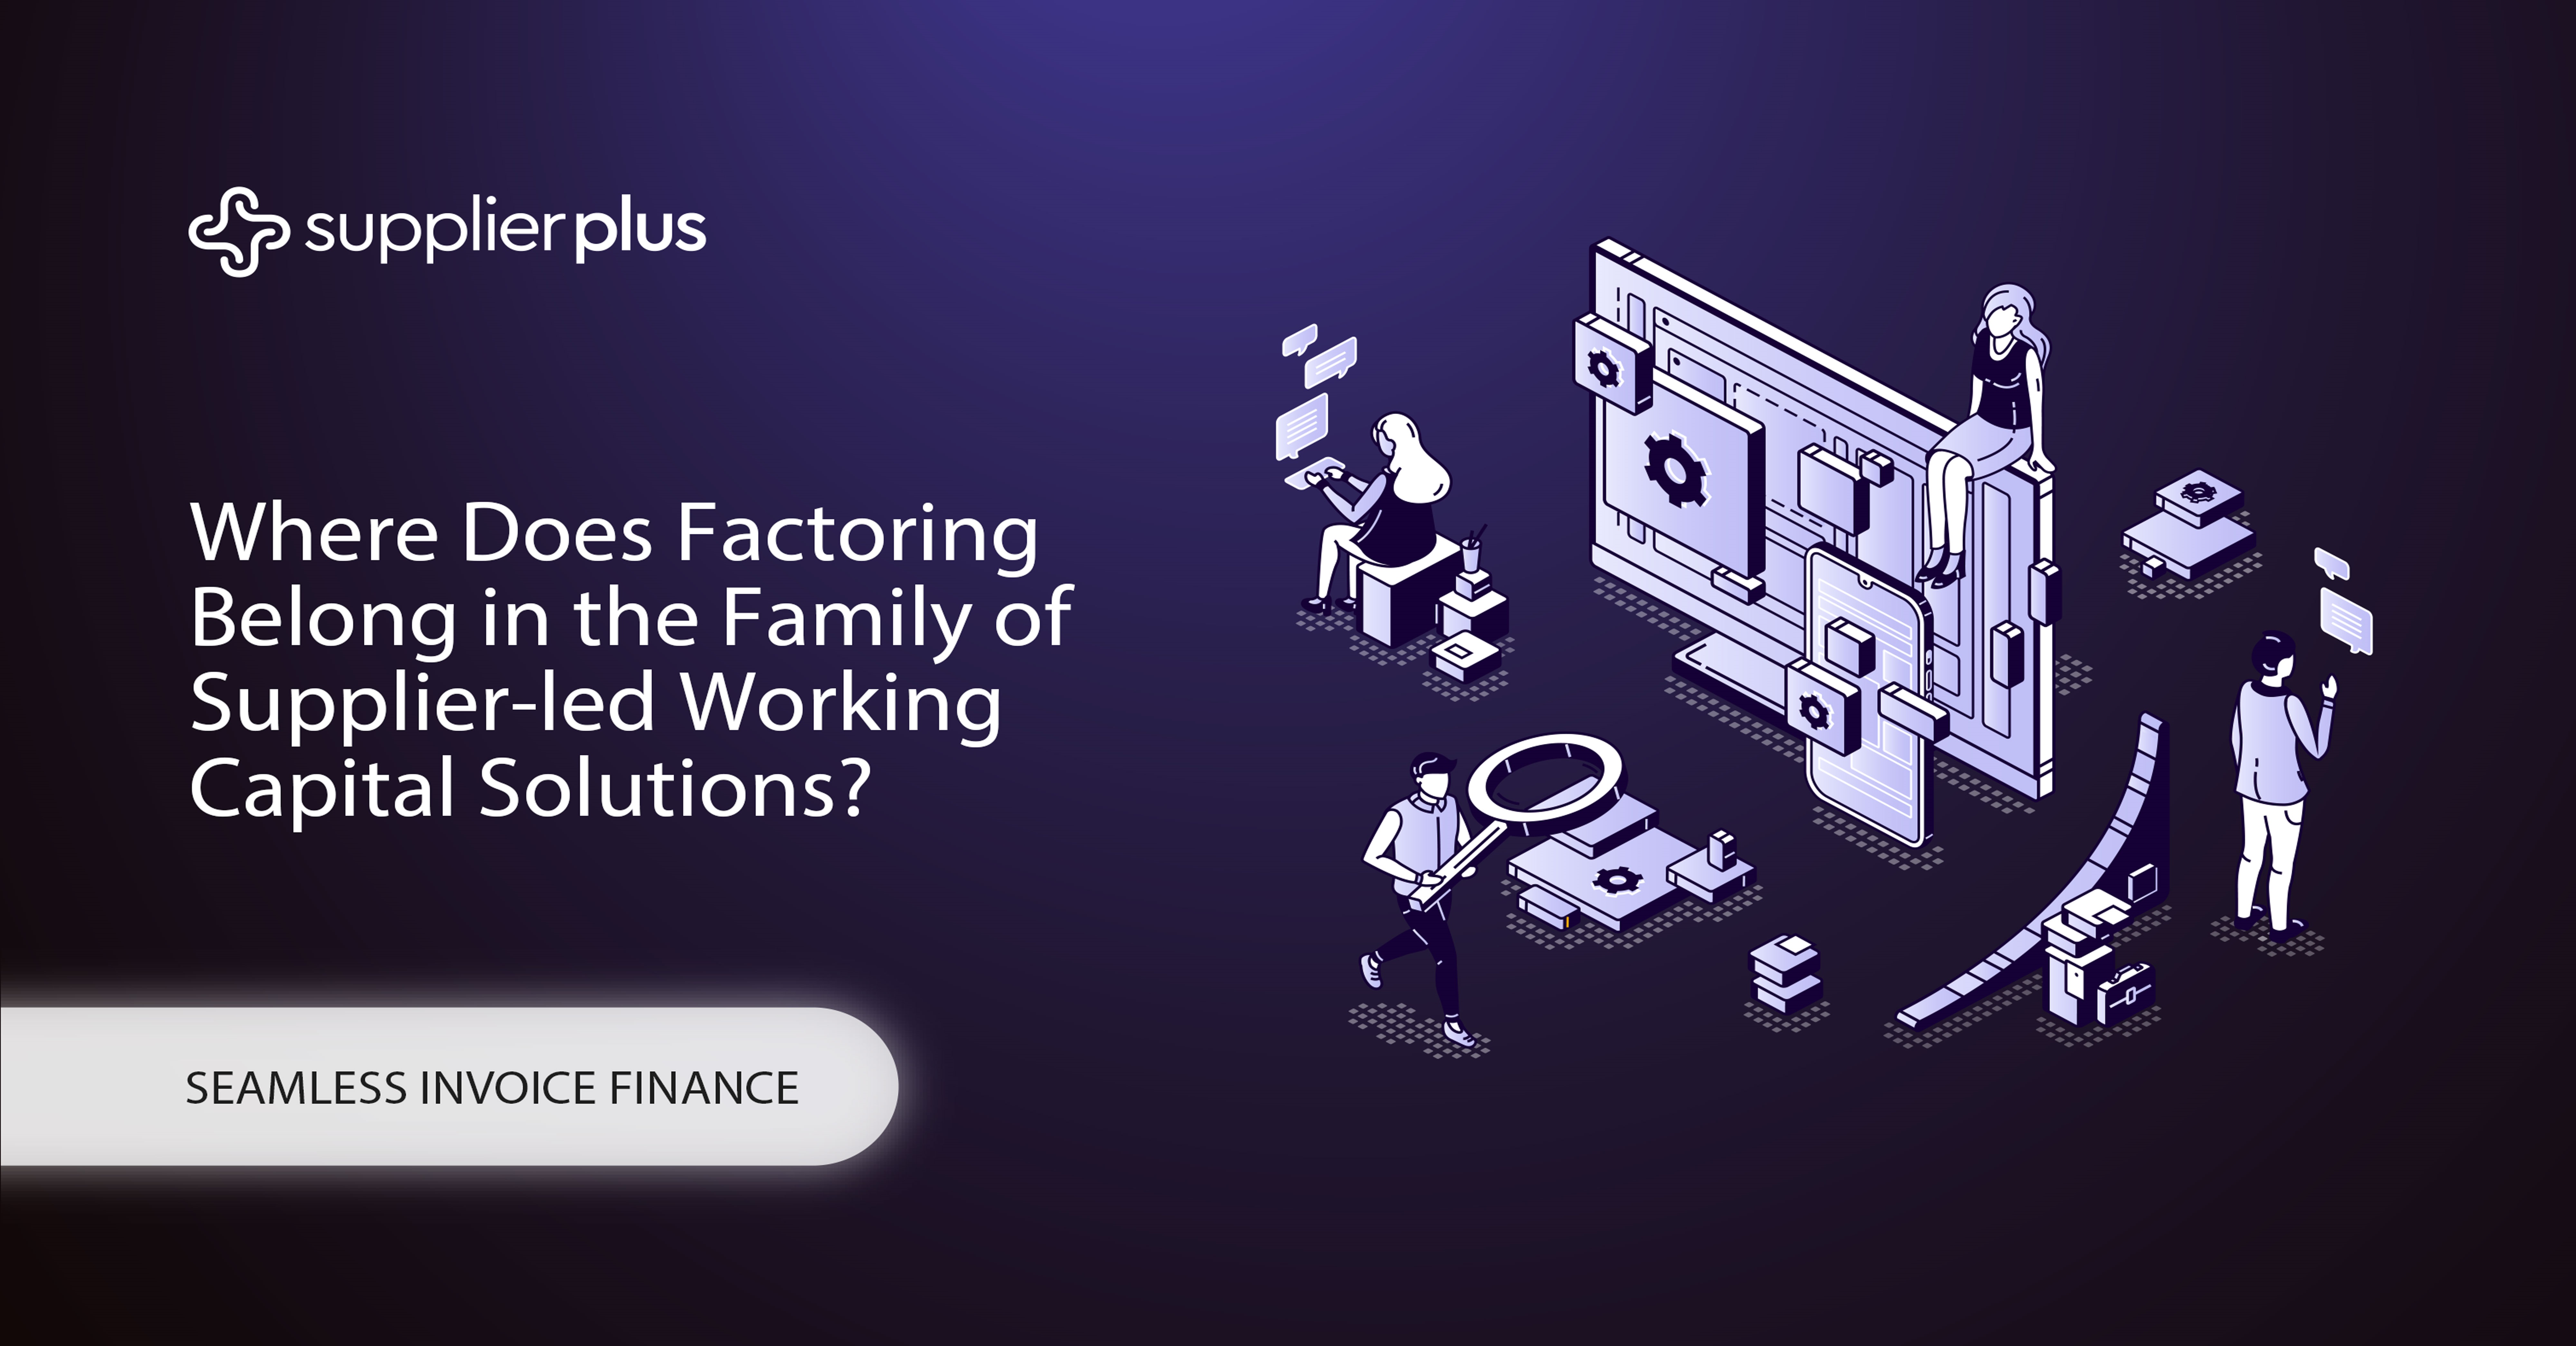 Where does factoring belong in the family of supplier-led working capital solutions?